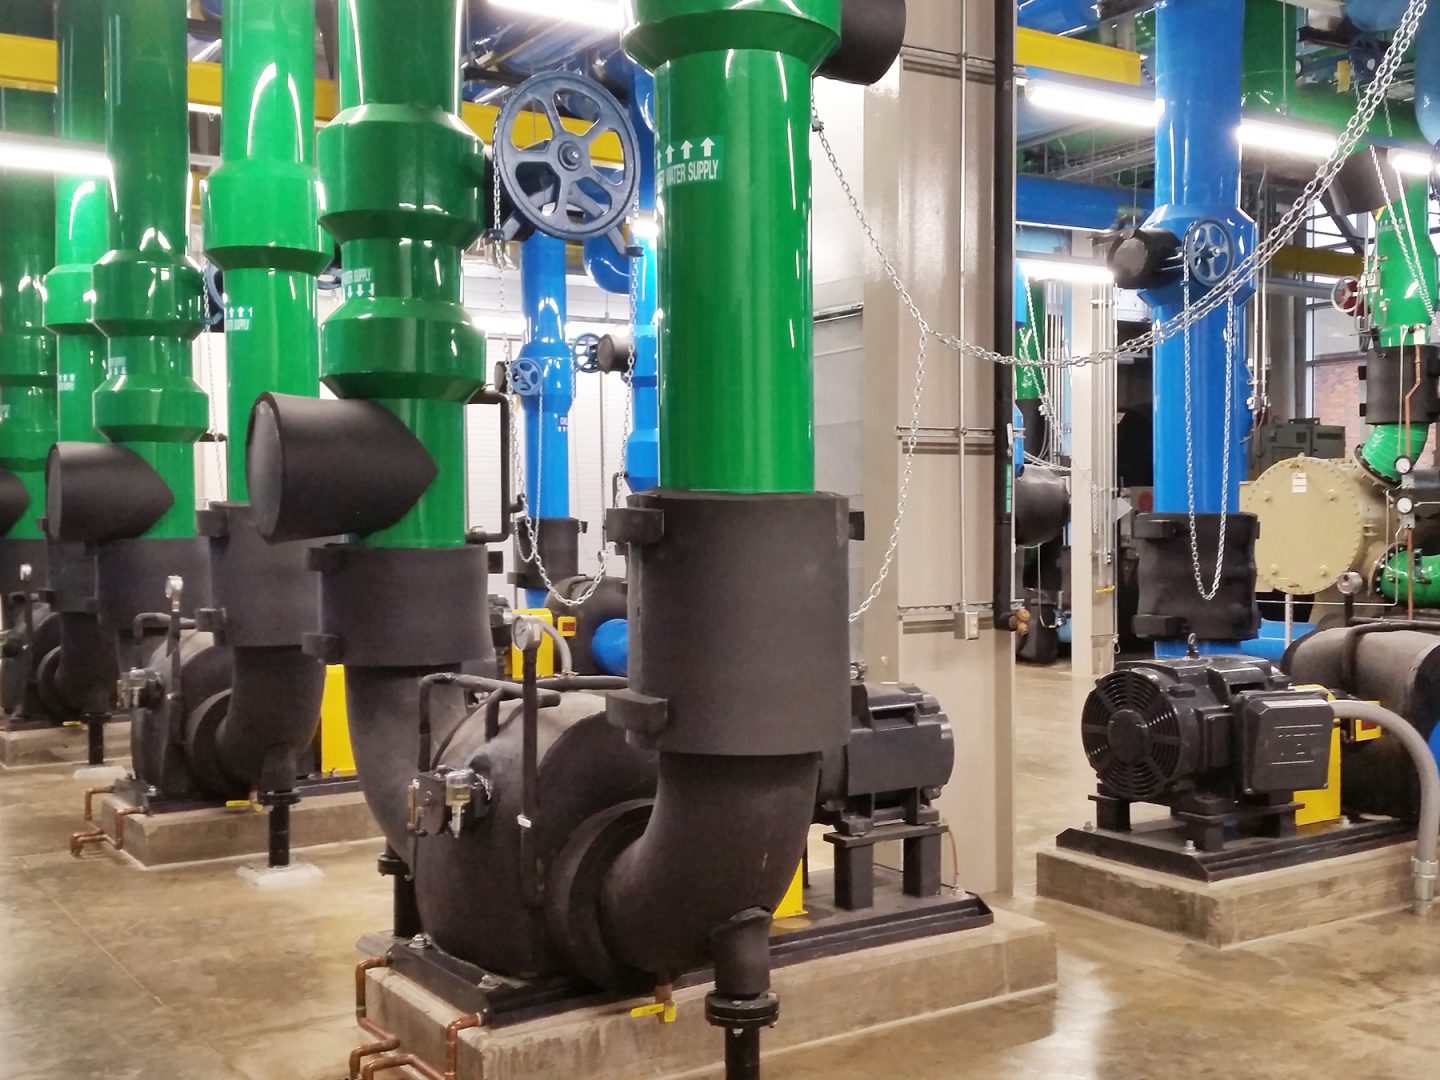 Innovative Design Leads to Win for the SDSU North Chiller Plant ...